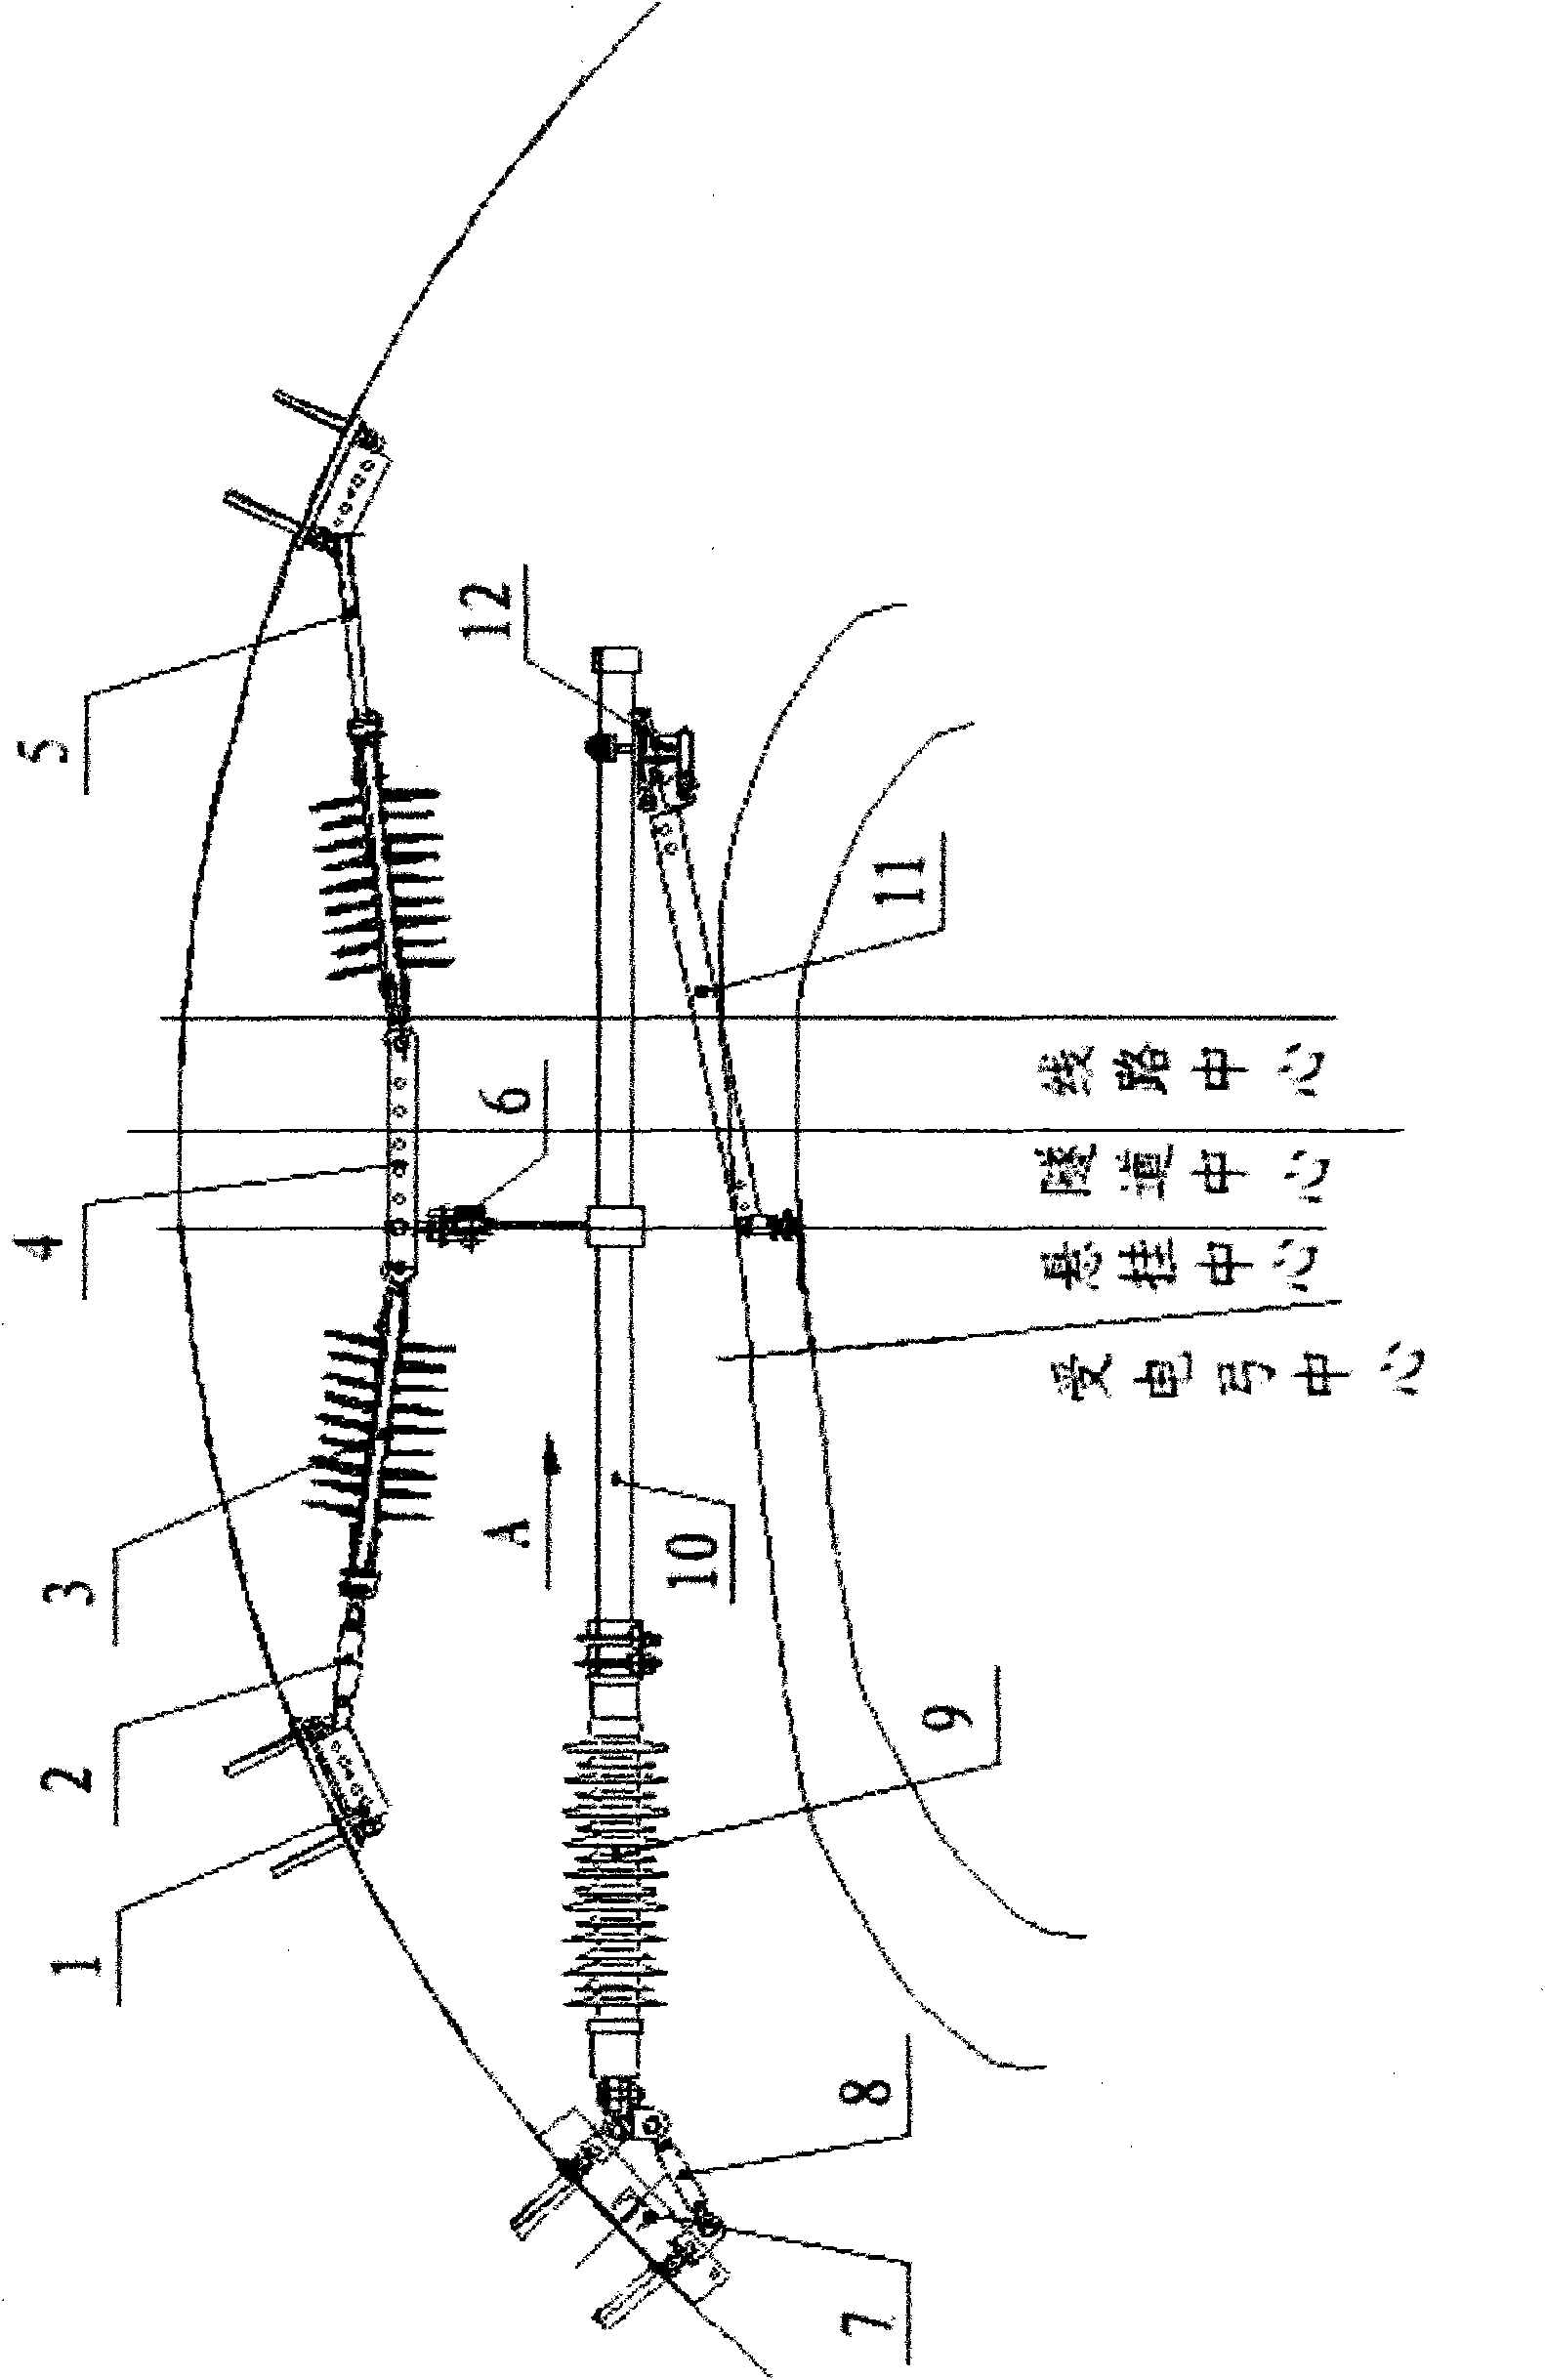 Single track tunnel overall positioning equipment